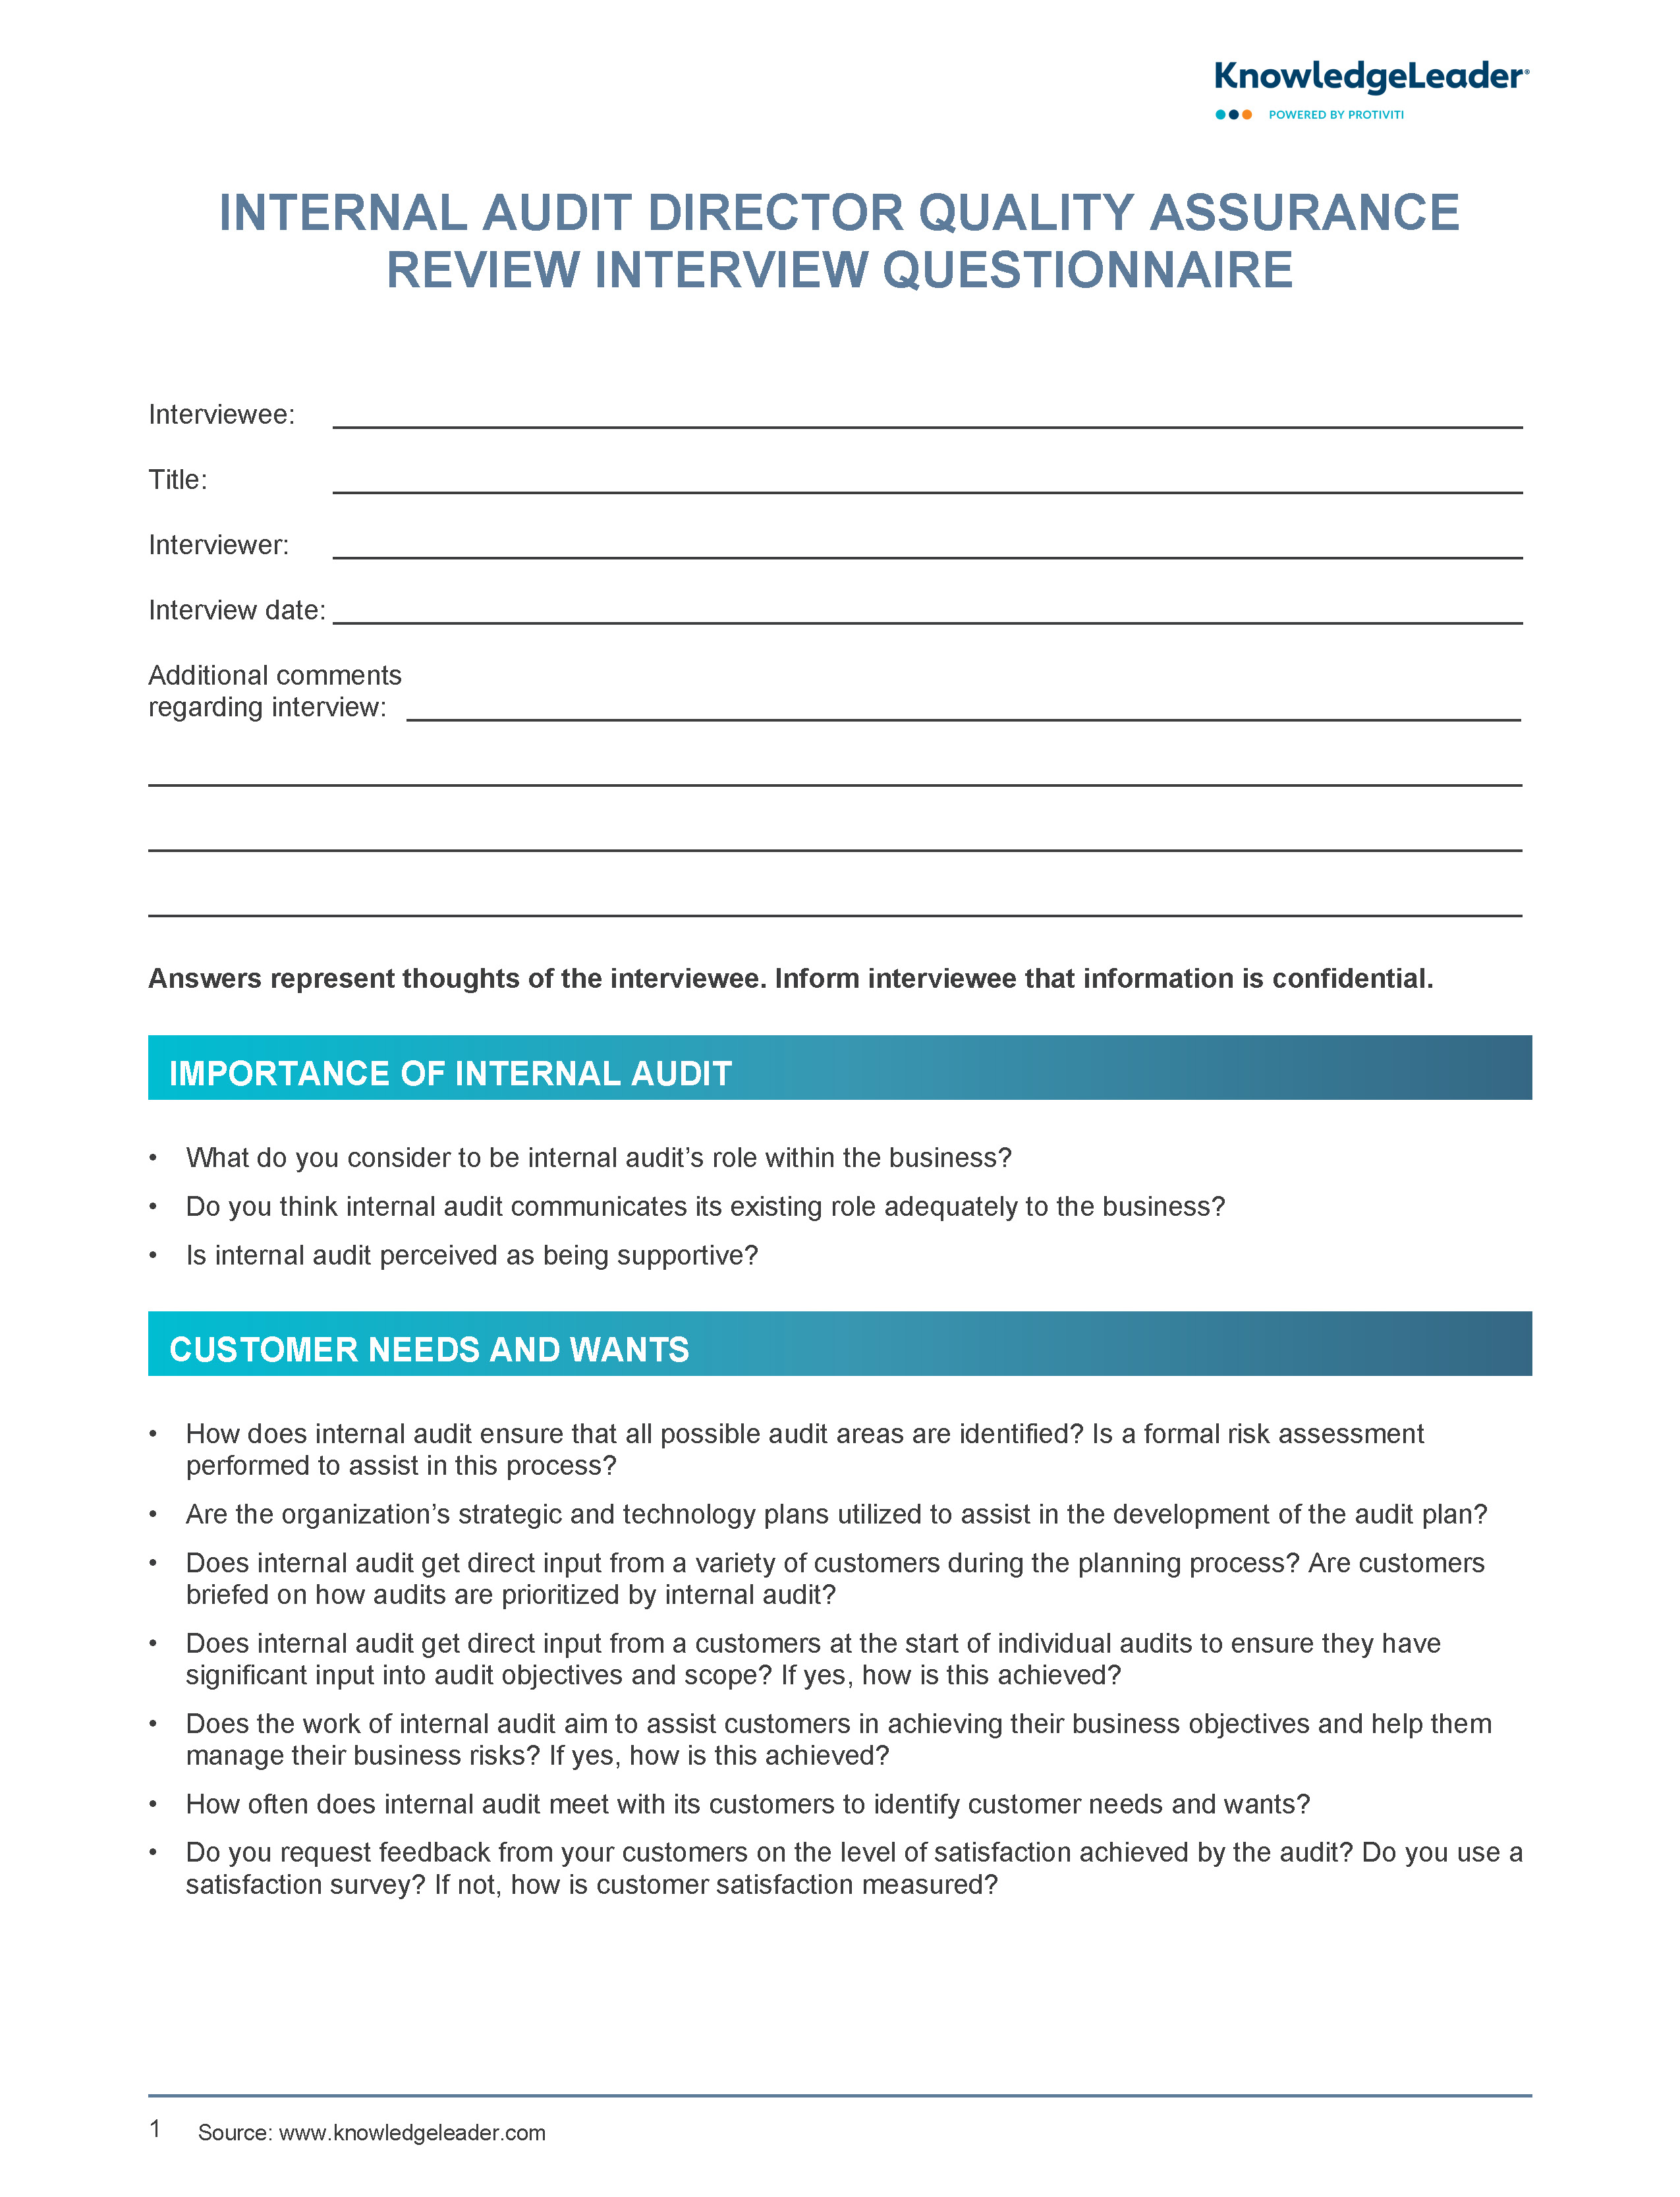 Screenshot of the first page of Internal Audit Director Interview Questionnaire